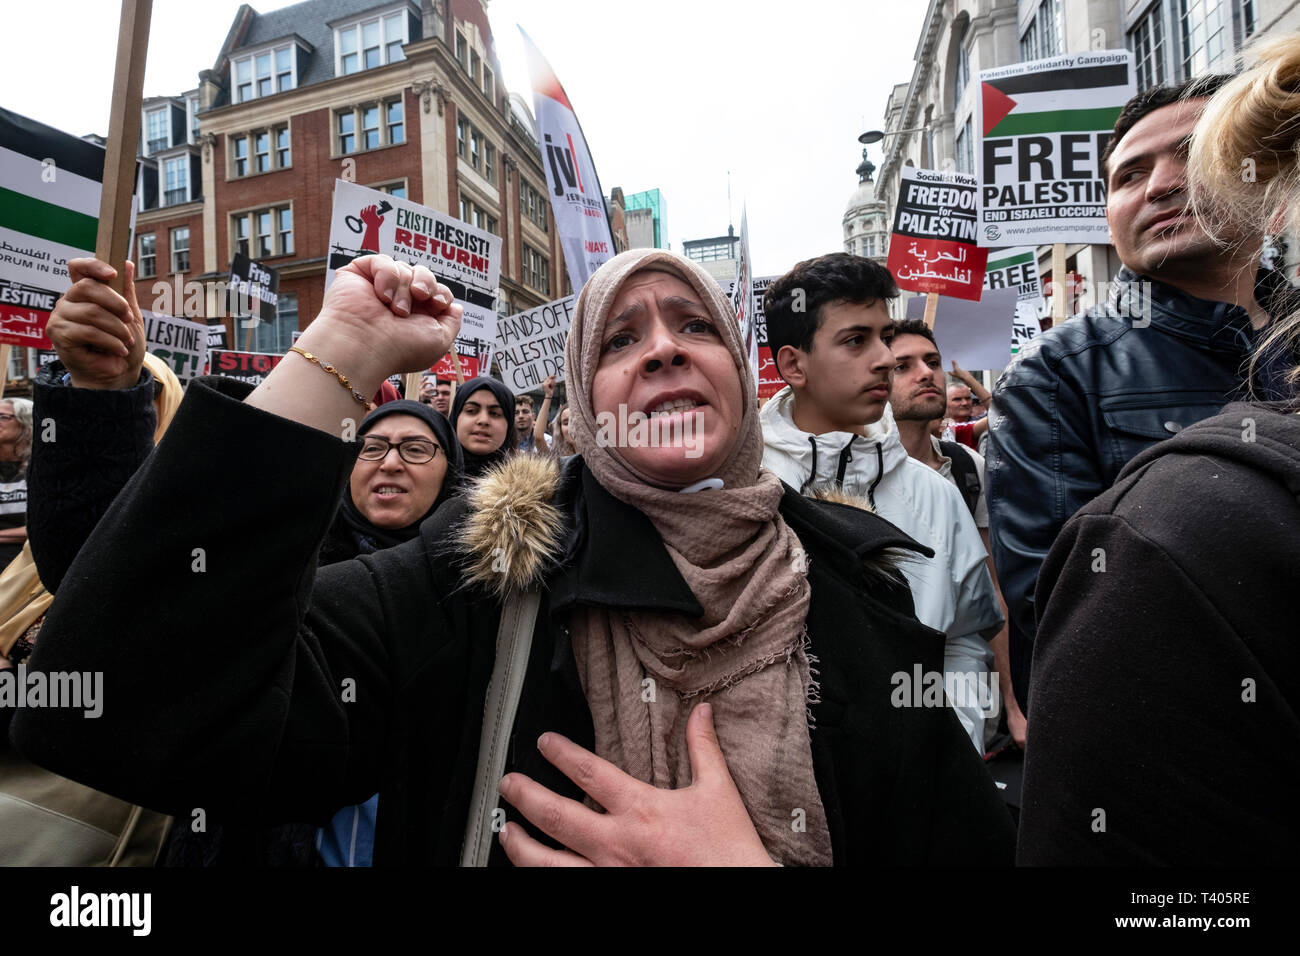 Rally for Palestine outside the Israeli Embassy: Exist,Resist, Return. A global call for solidarity on the 1st anniversary of the start of the Great Return March. Stock Photo